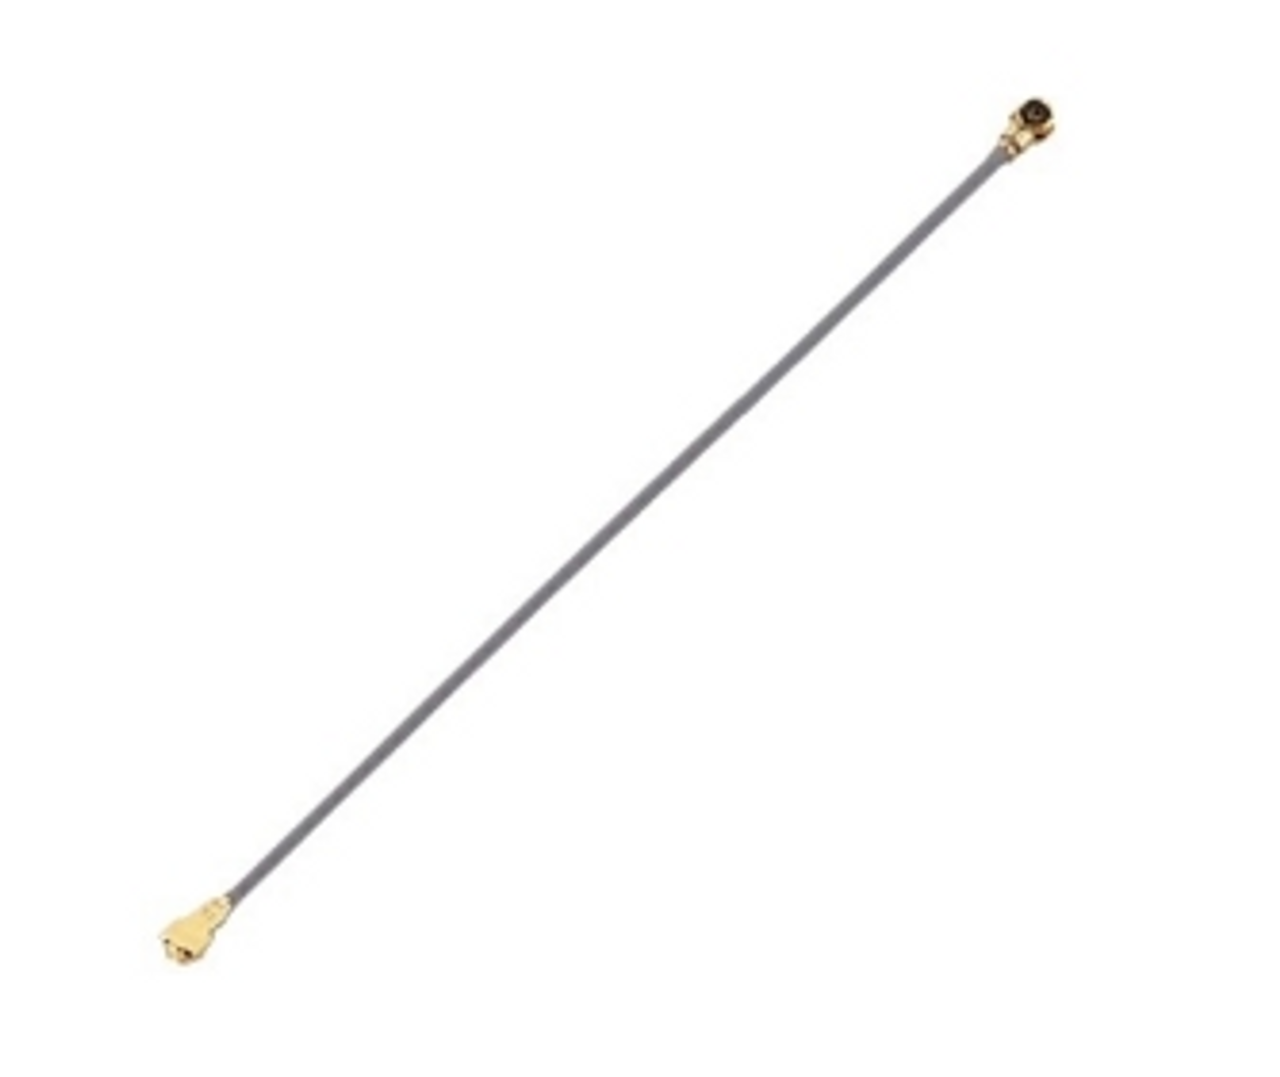 9-Inch - MHF4 IPEX to MHF4 IPEX ON 0.81mm Coaxial Cable - HSC